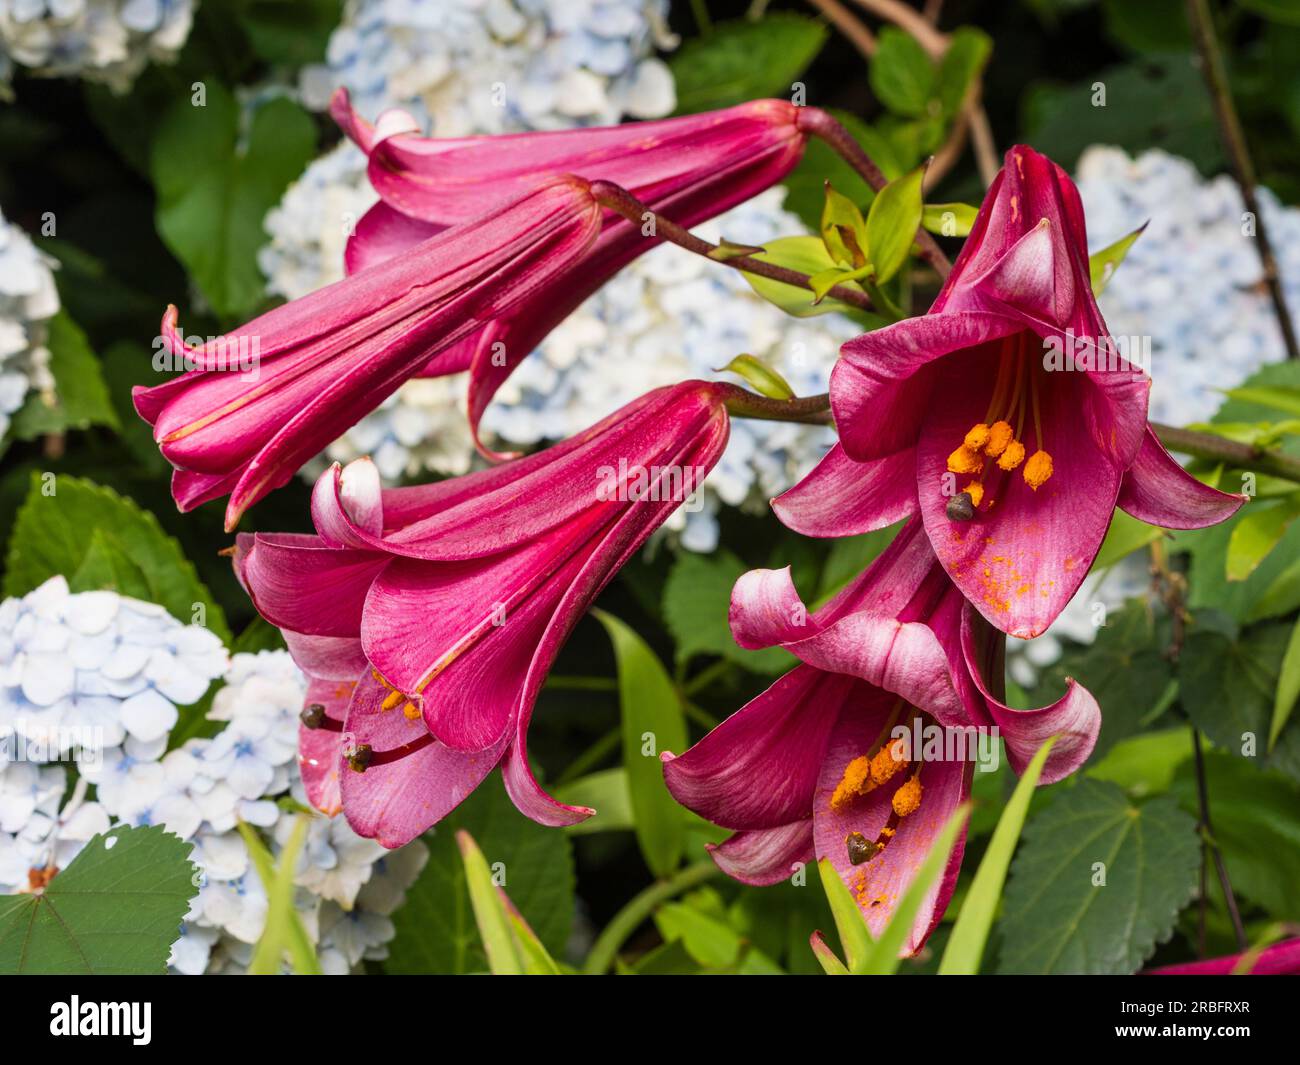 Fragrant, deep pink summer flowers of the trumpet lily, Lilium 'Pink Perfection' Stock Photo